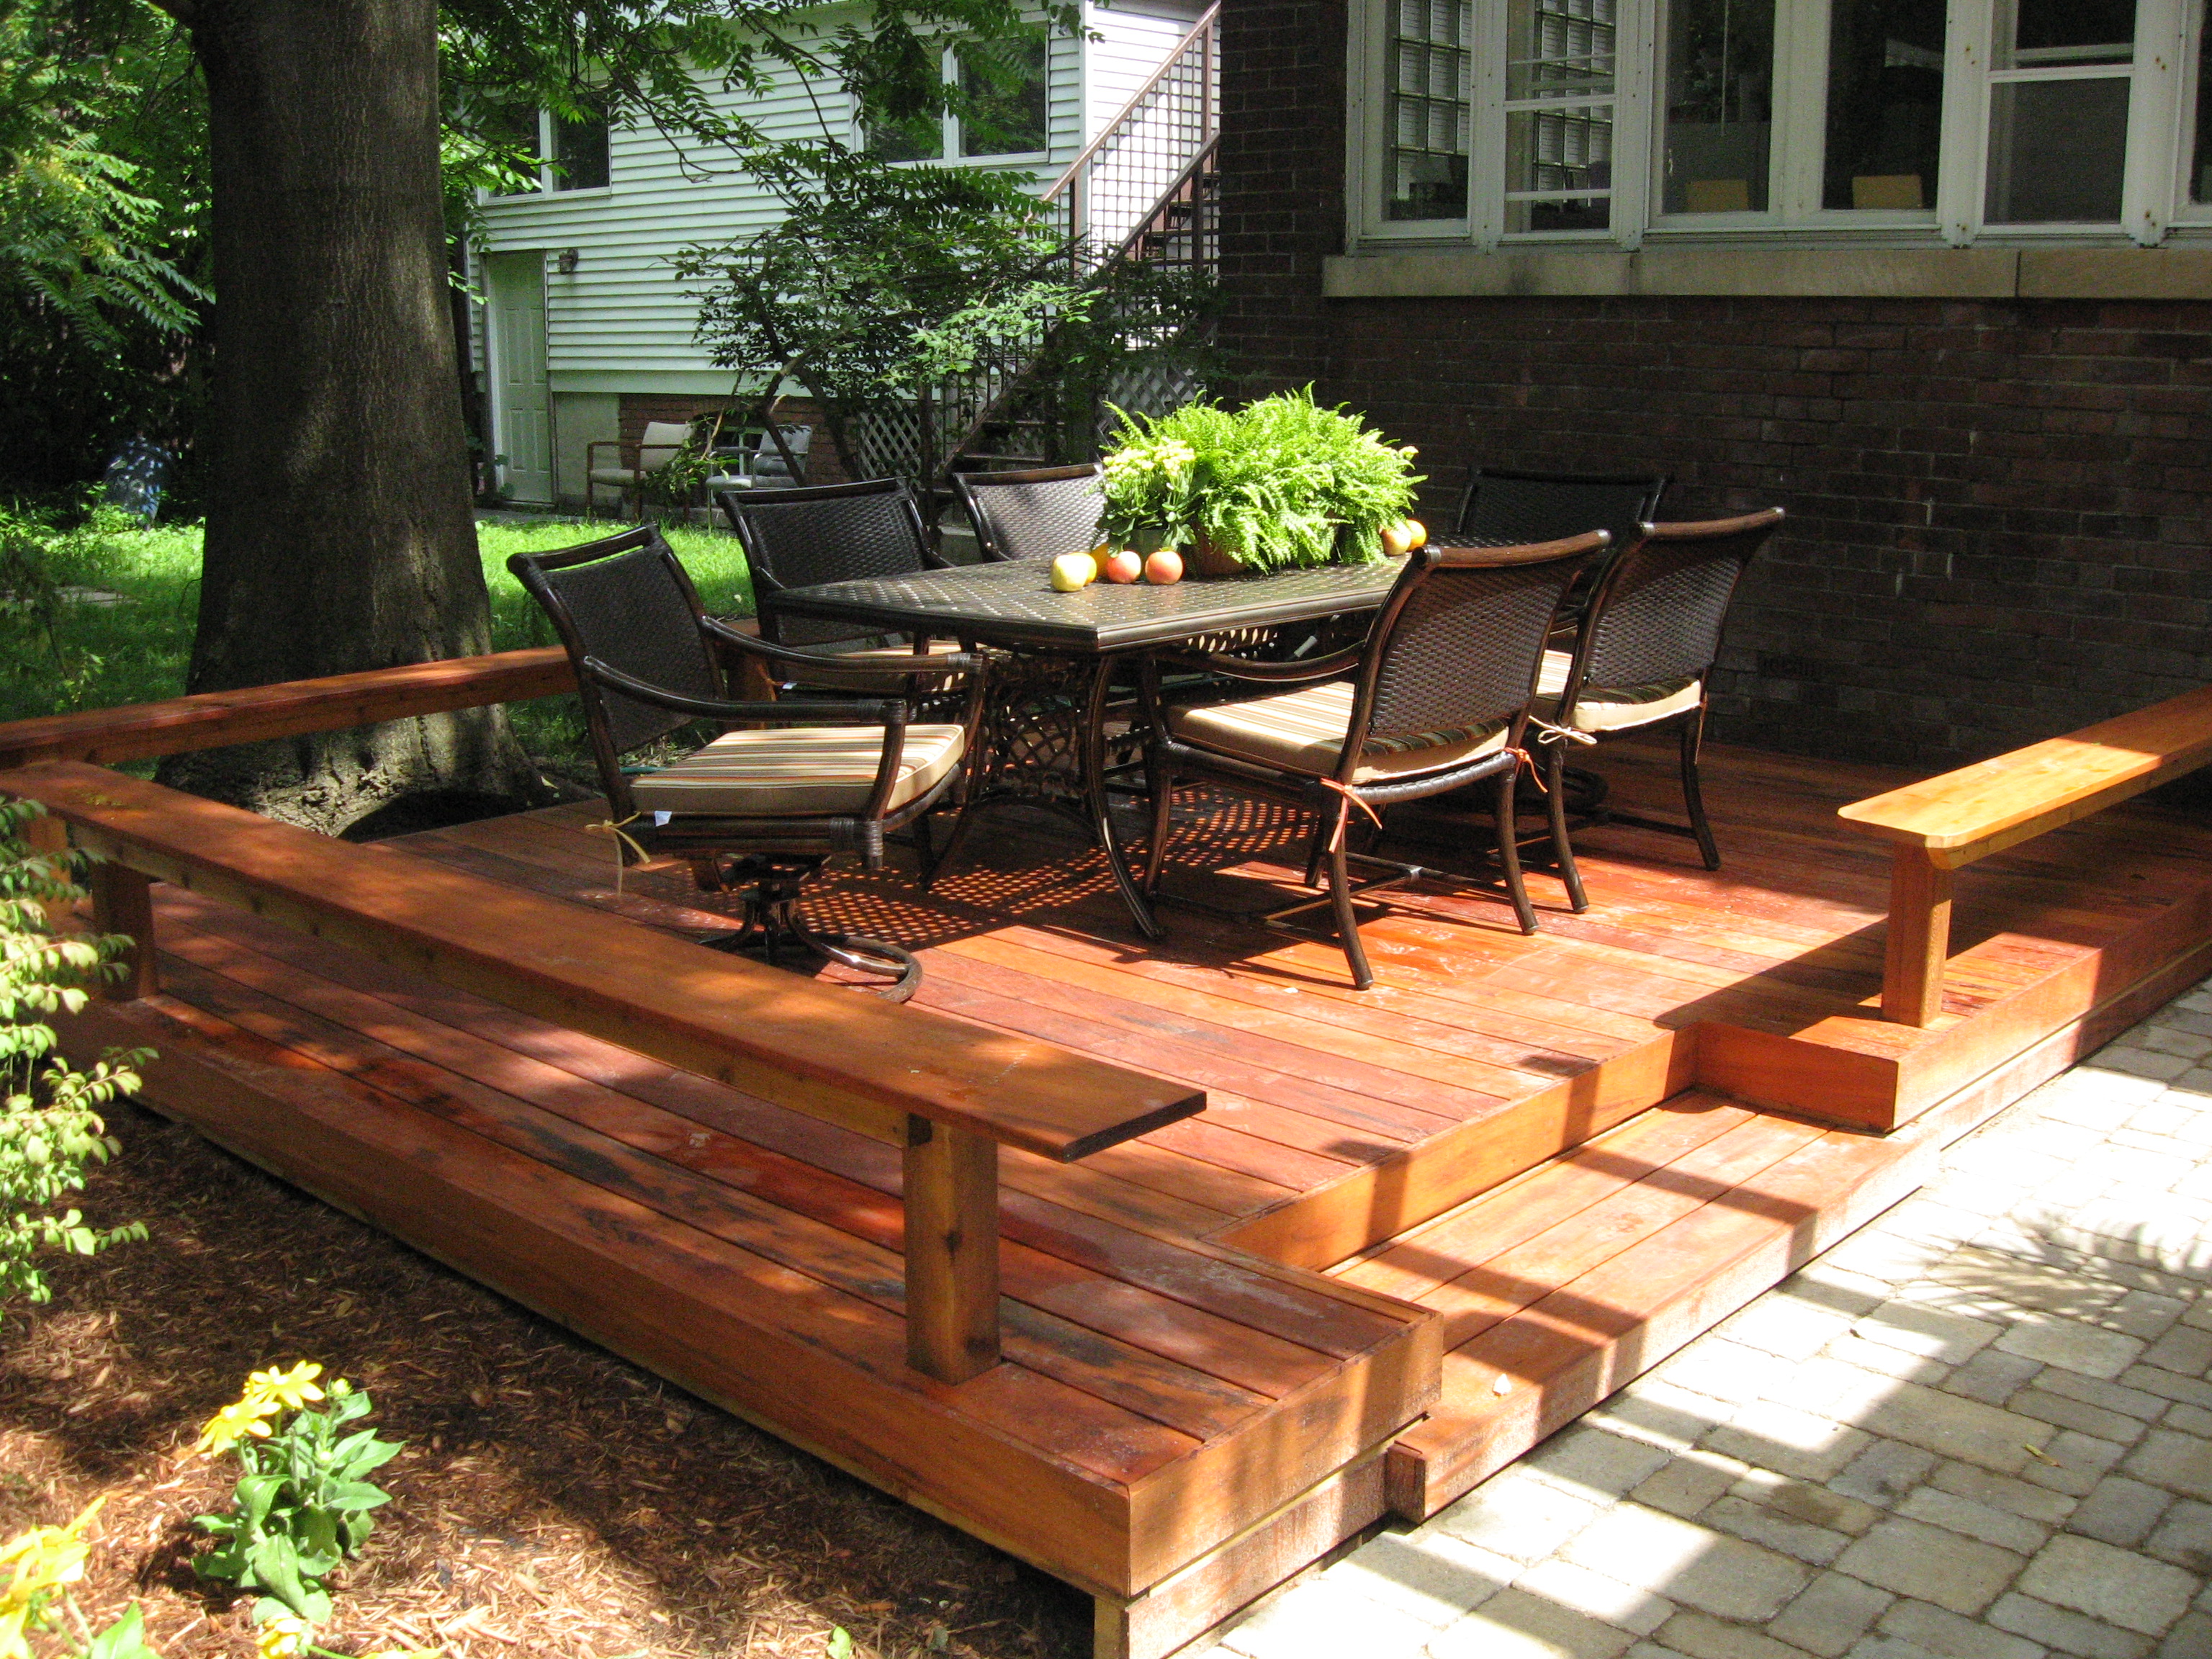 Deck vs. Patio: What Is Best for You? | HuffPost